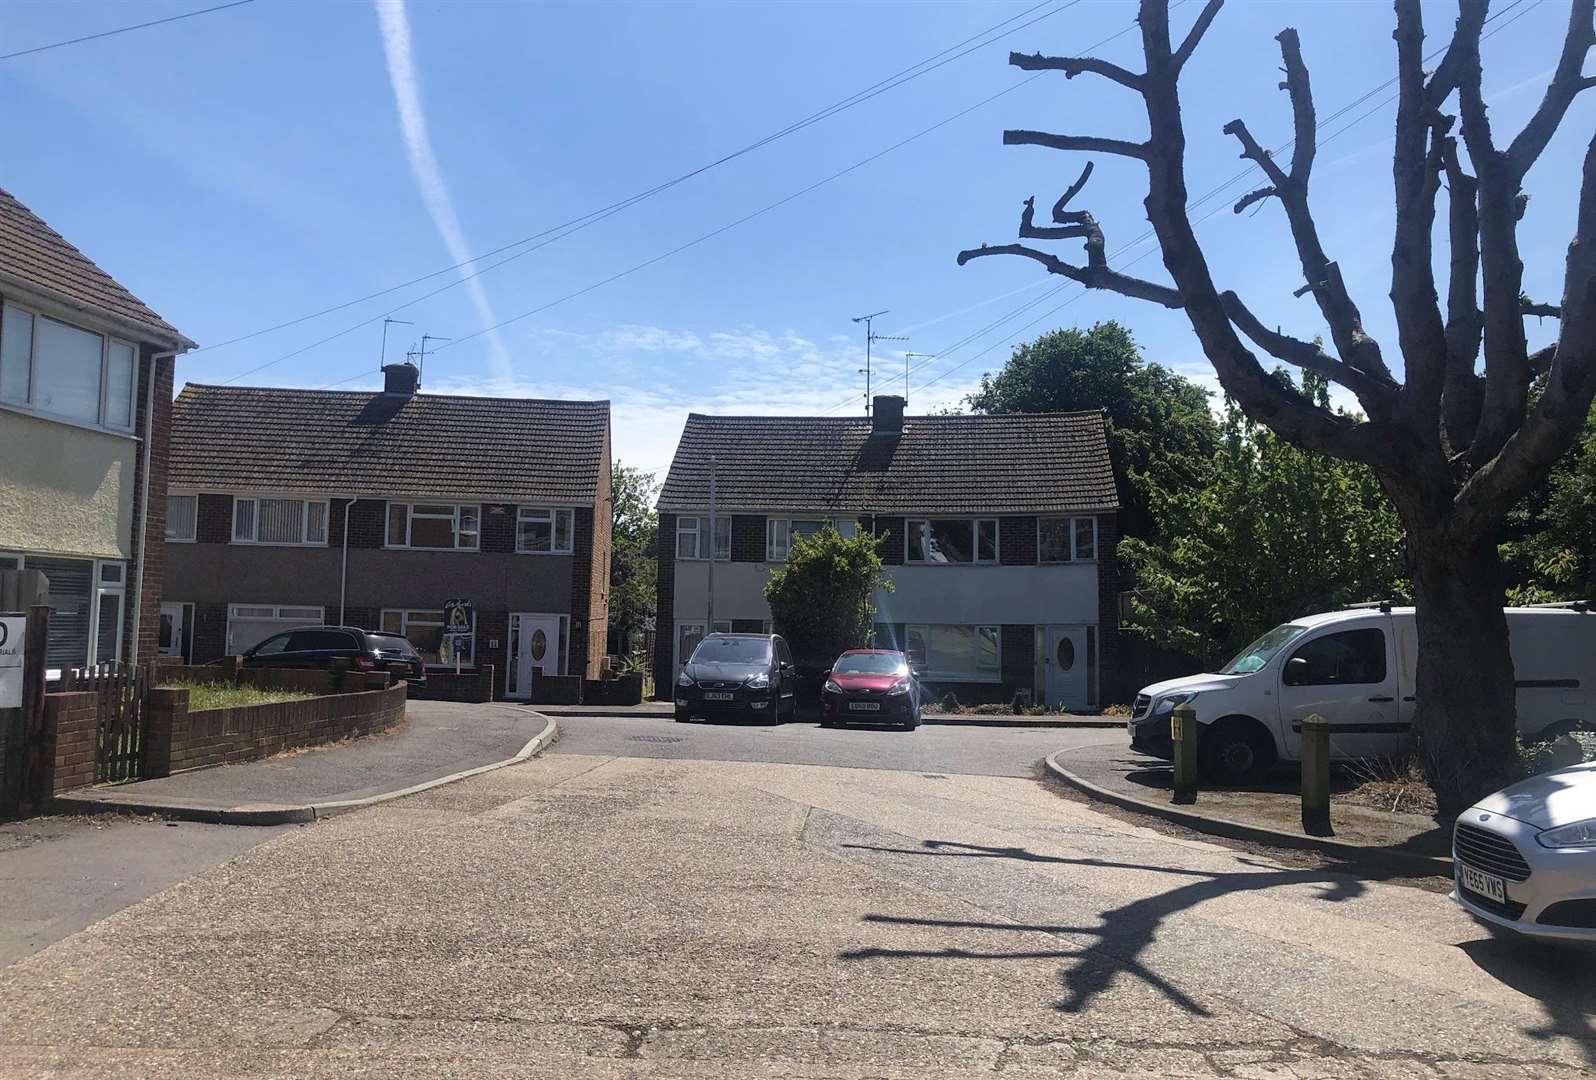 Homes in Victoria Road, Broadstairs, are on a 'ticking time bomb' according to residents